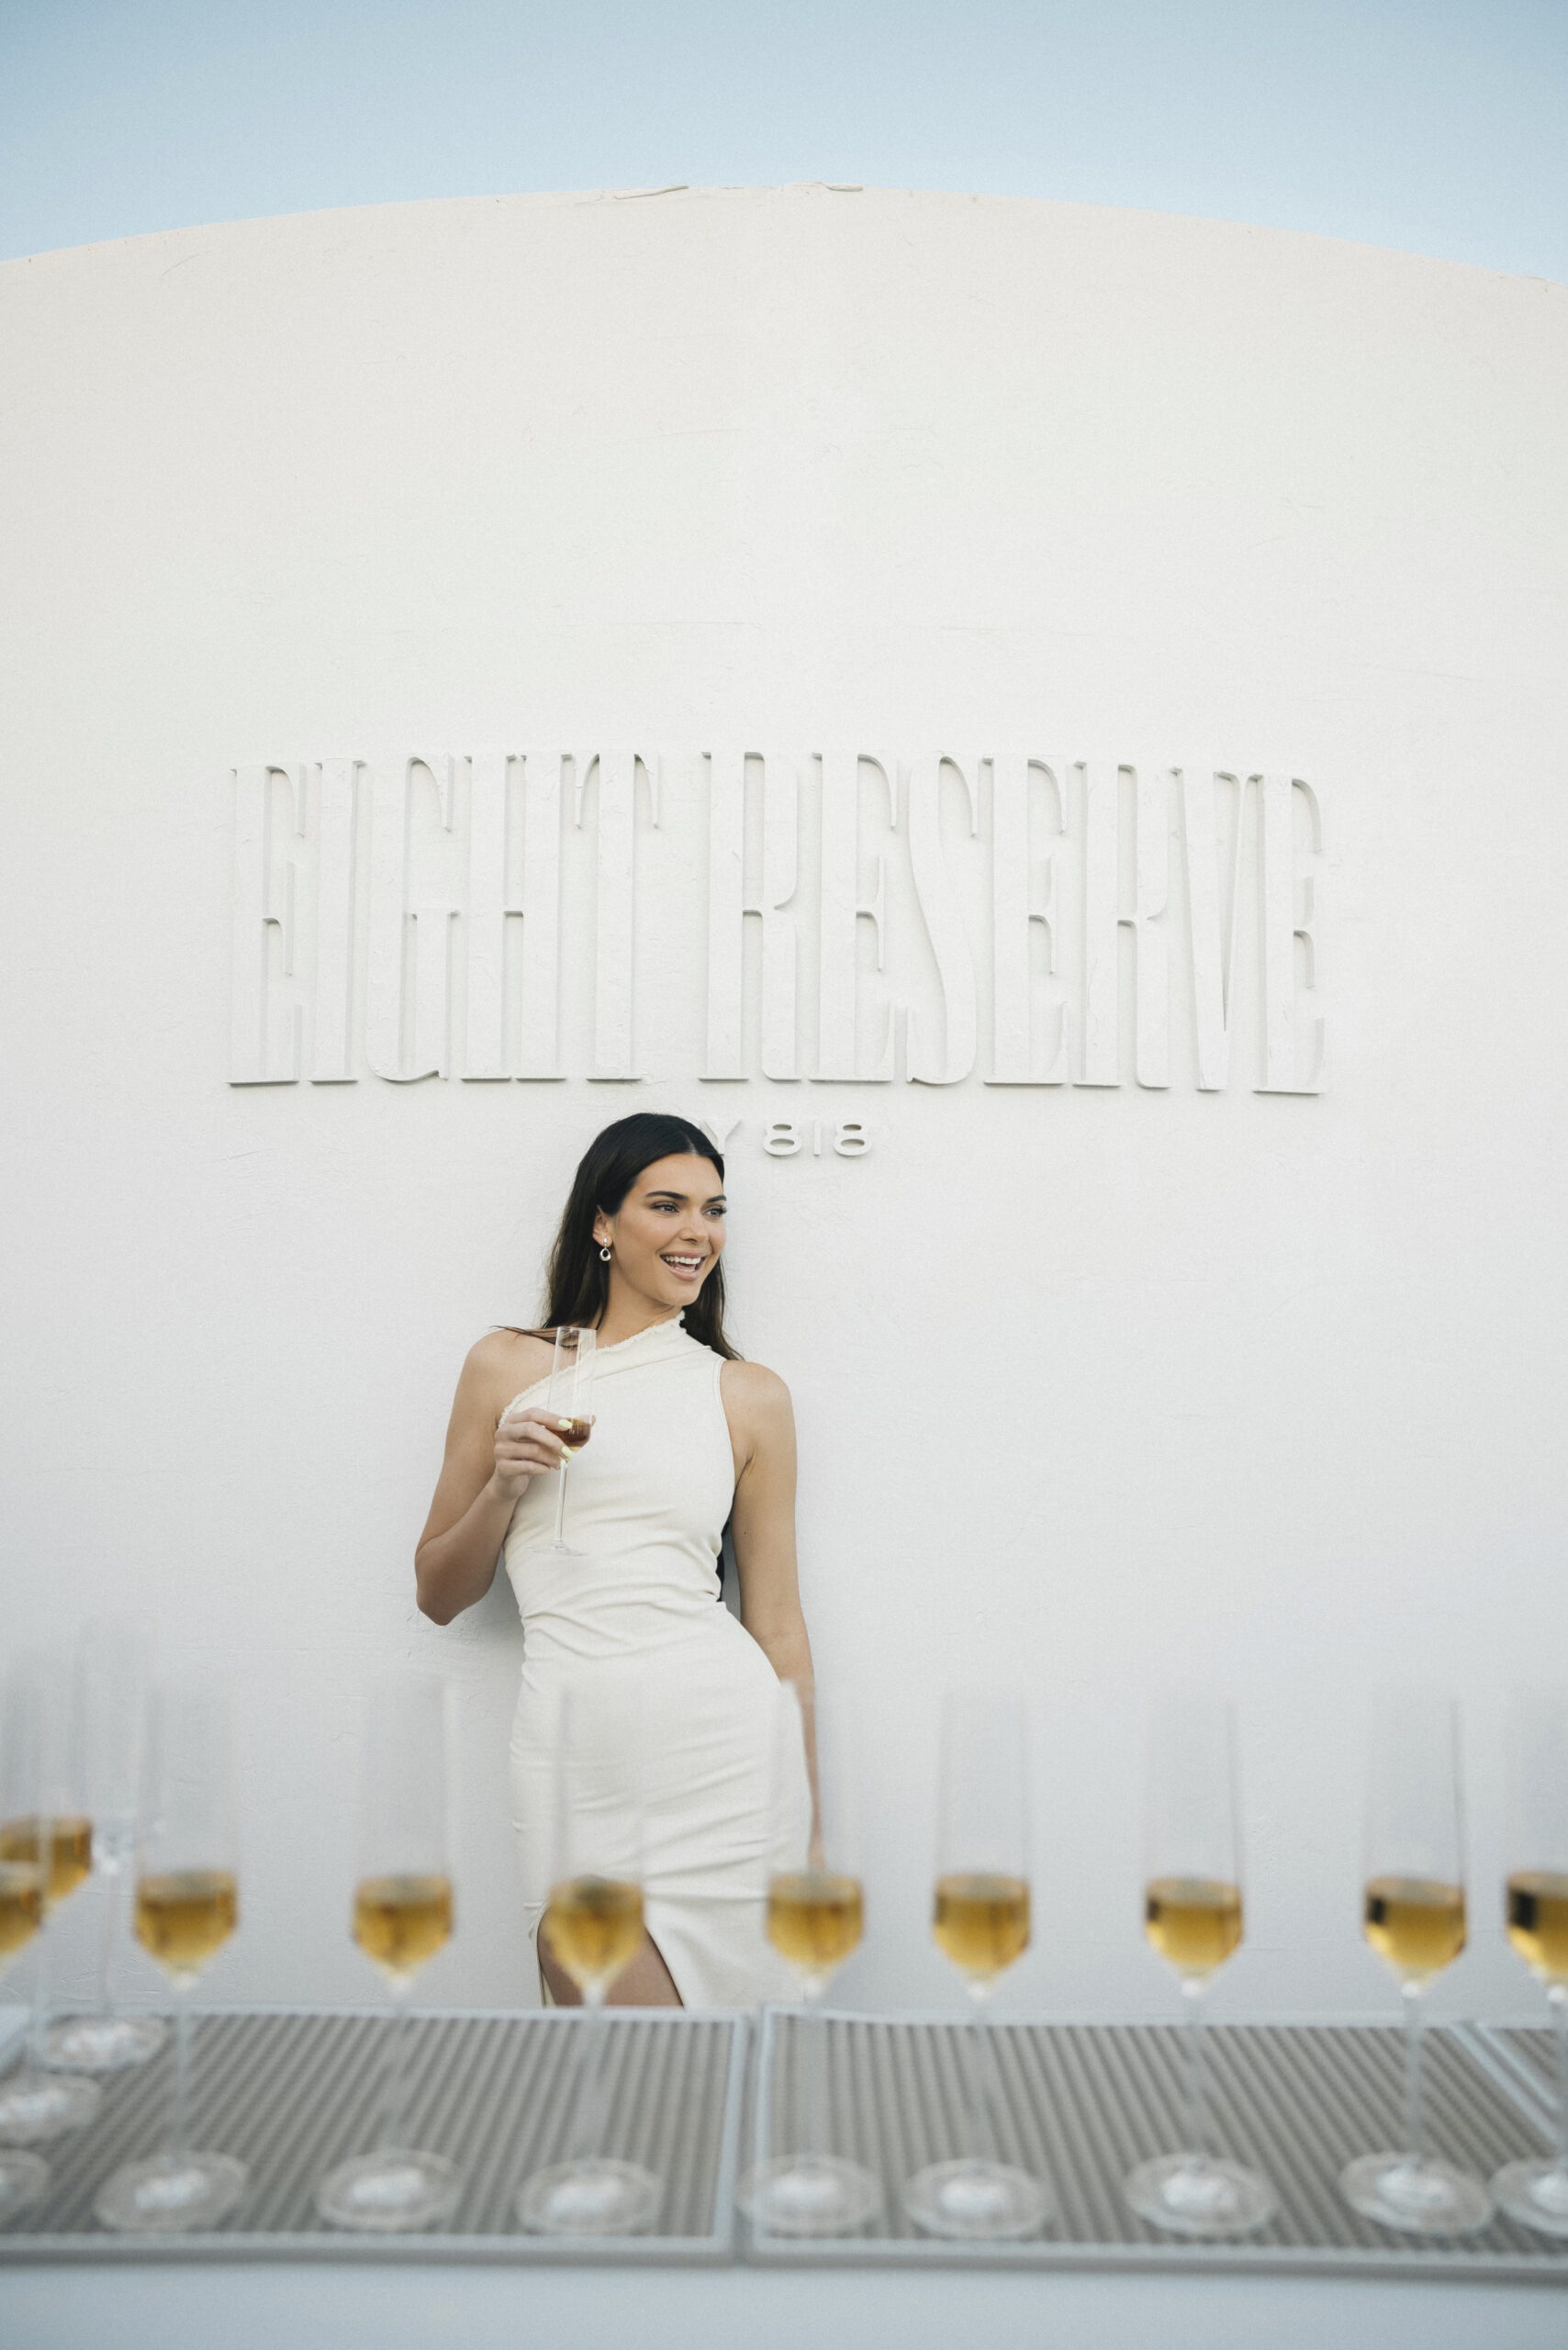 Kendall Jenner posing with a glass of Eight Reserve at the launch party.